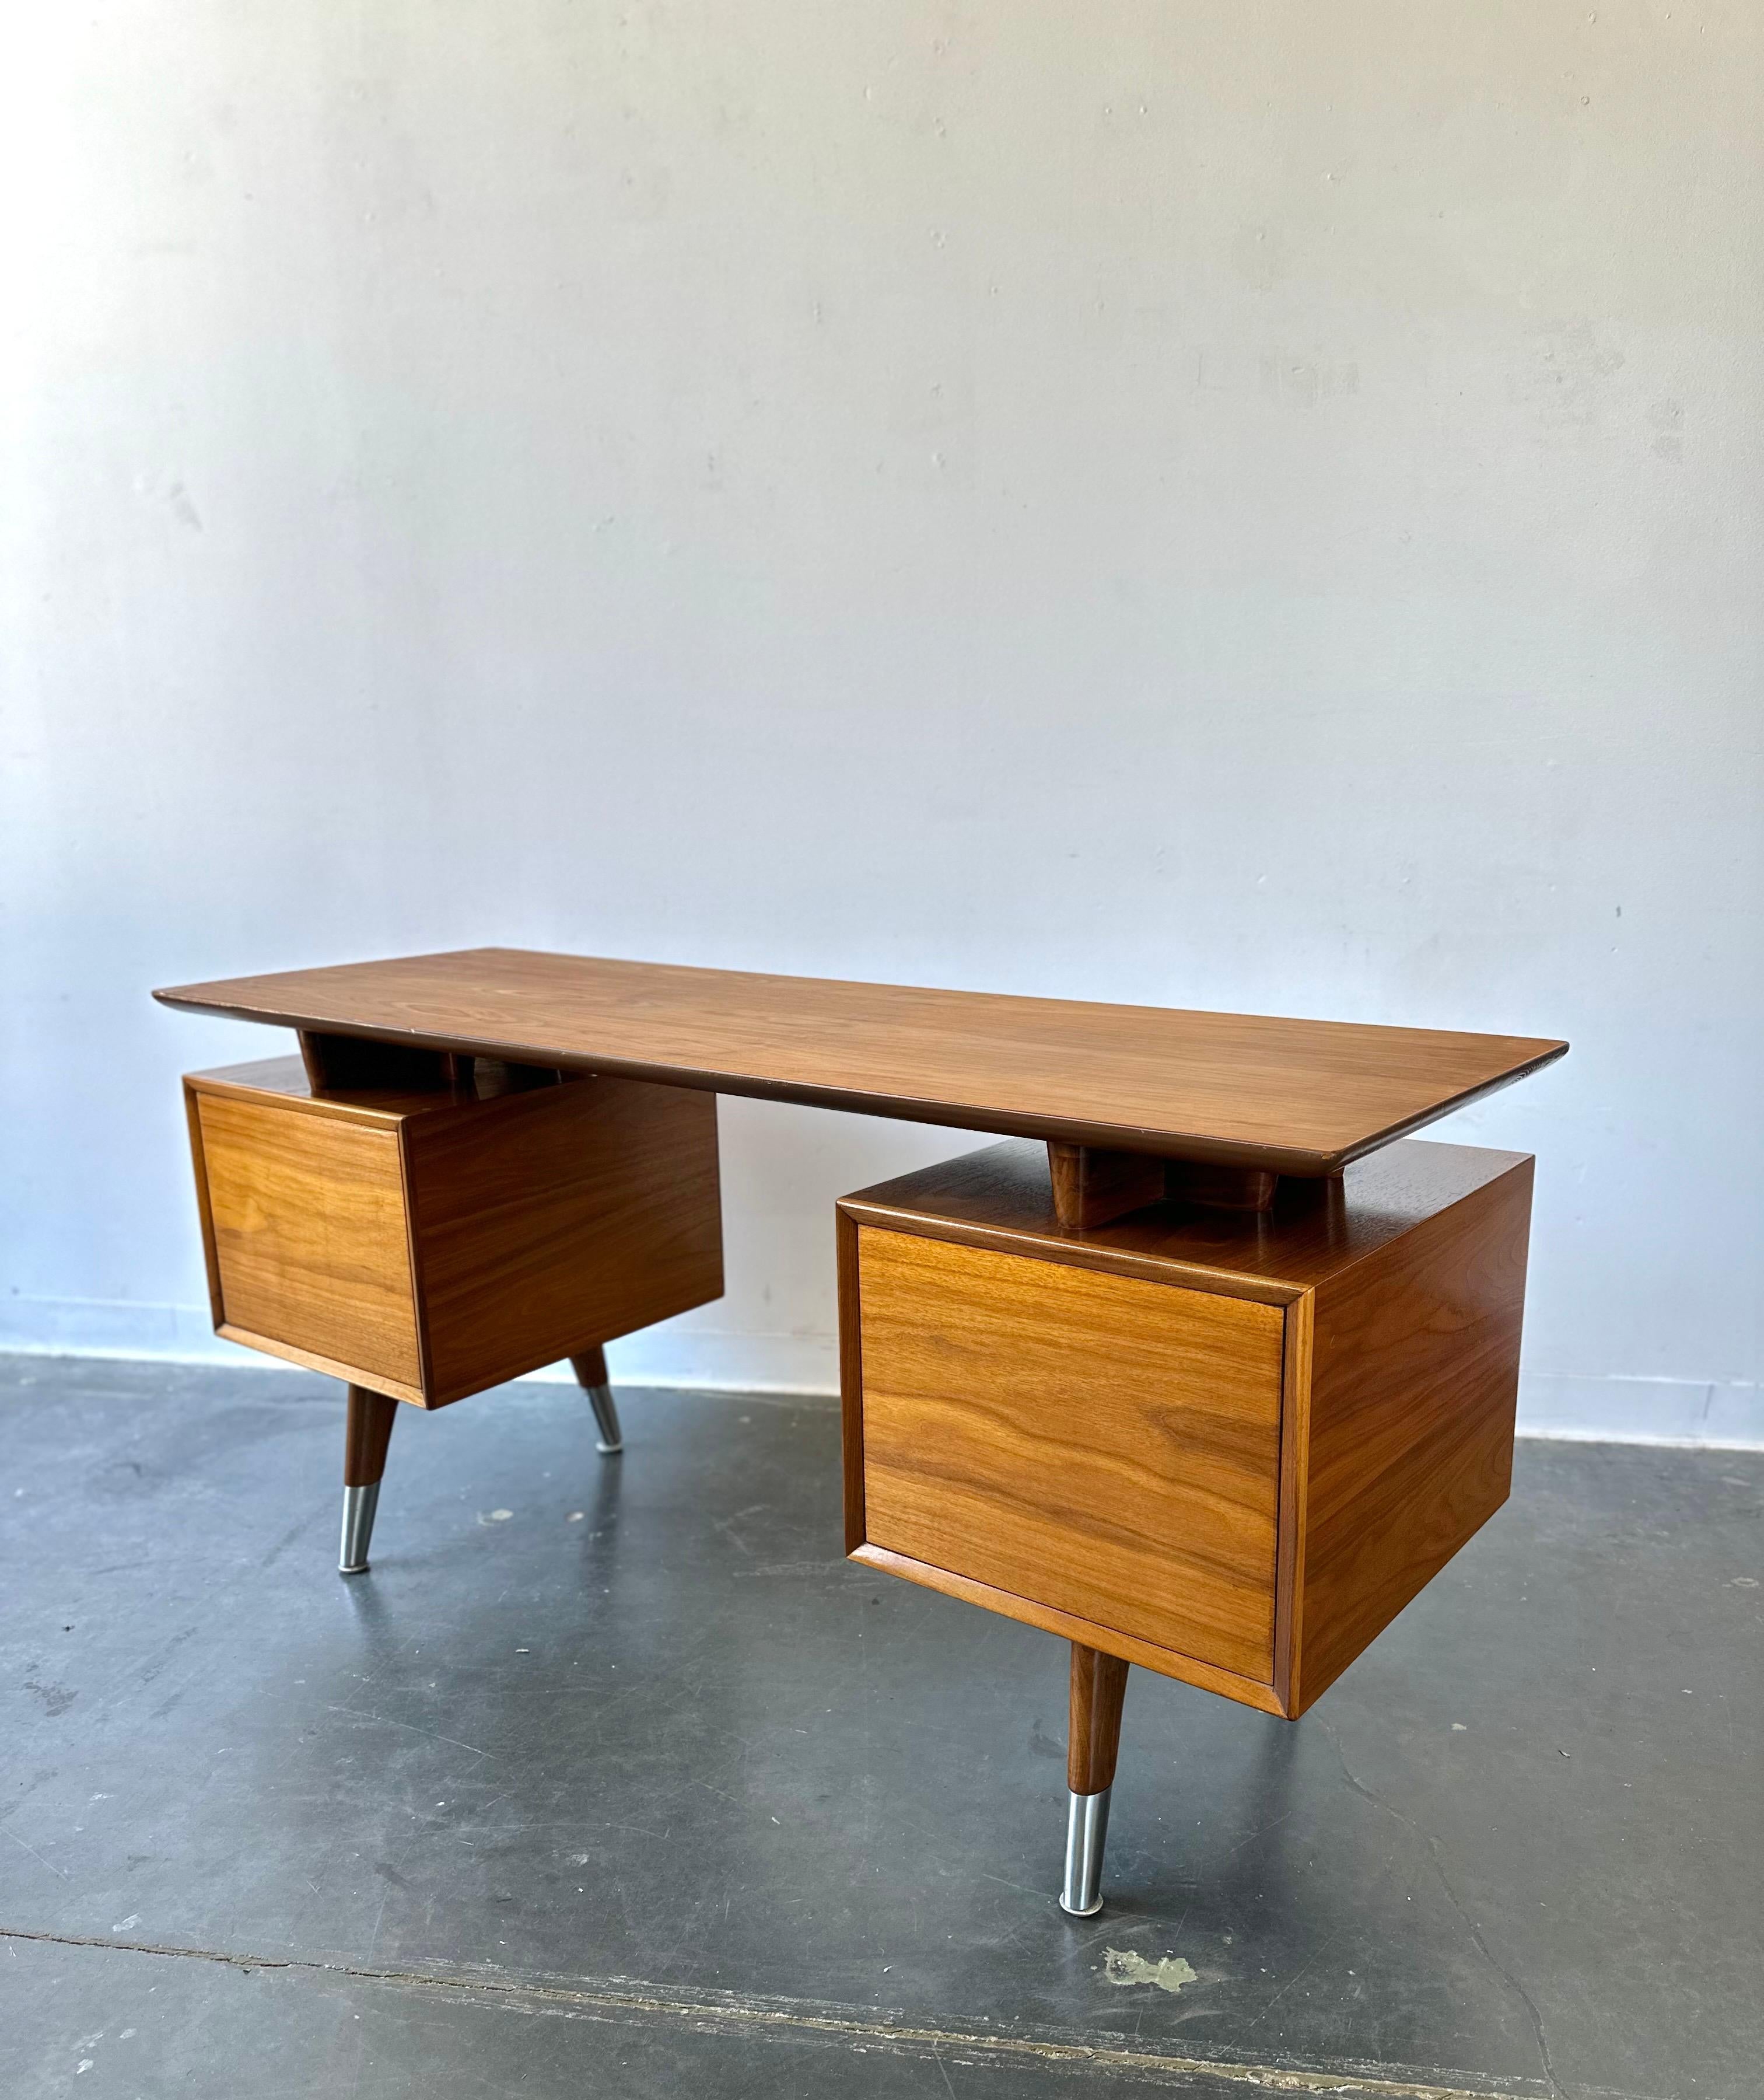 Alma furniture floating walnut desk

Super rare floating desk with finished back.

Walnut with chrome knobs and feet caps. This has excellent wood grain with a refinished top.

Dimensions:

60” W x 21” D x 29” H